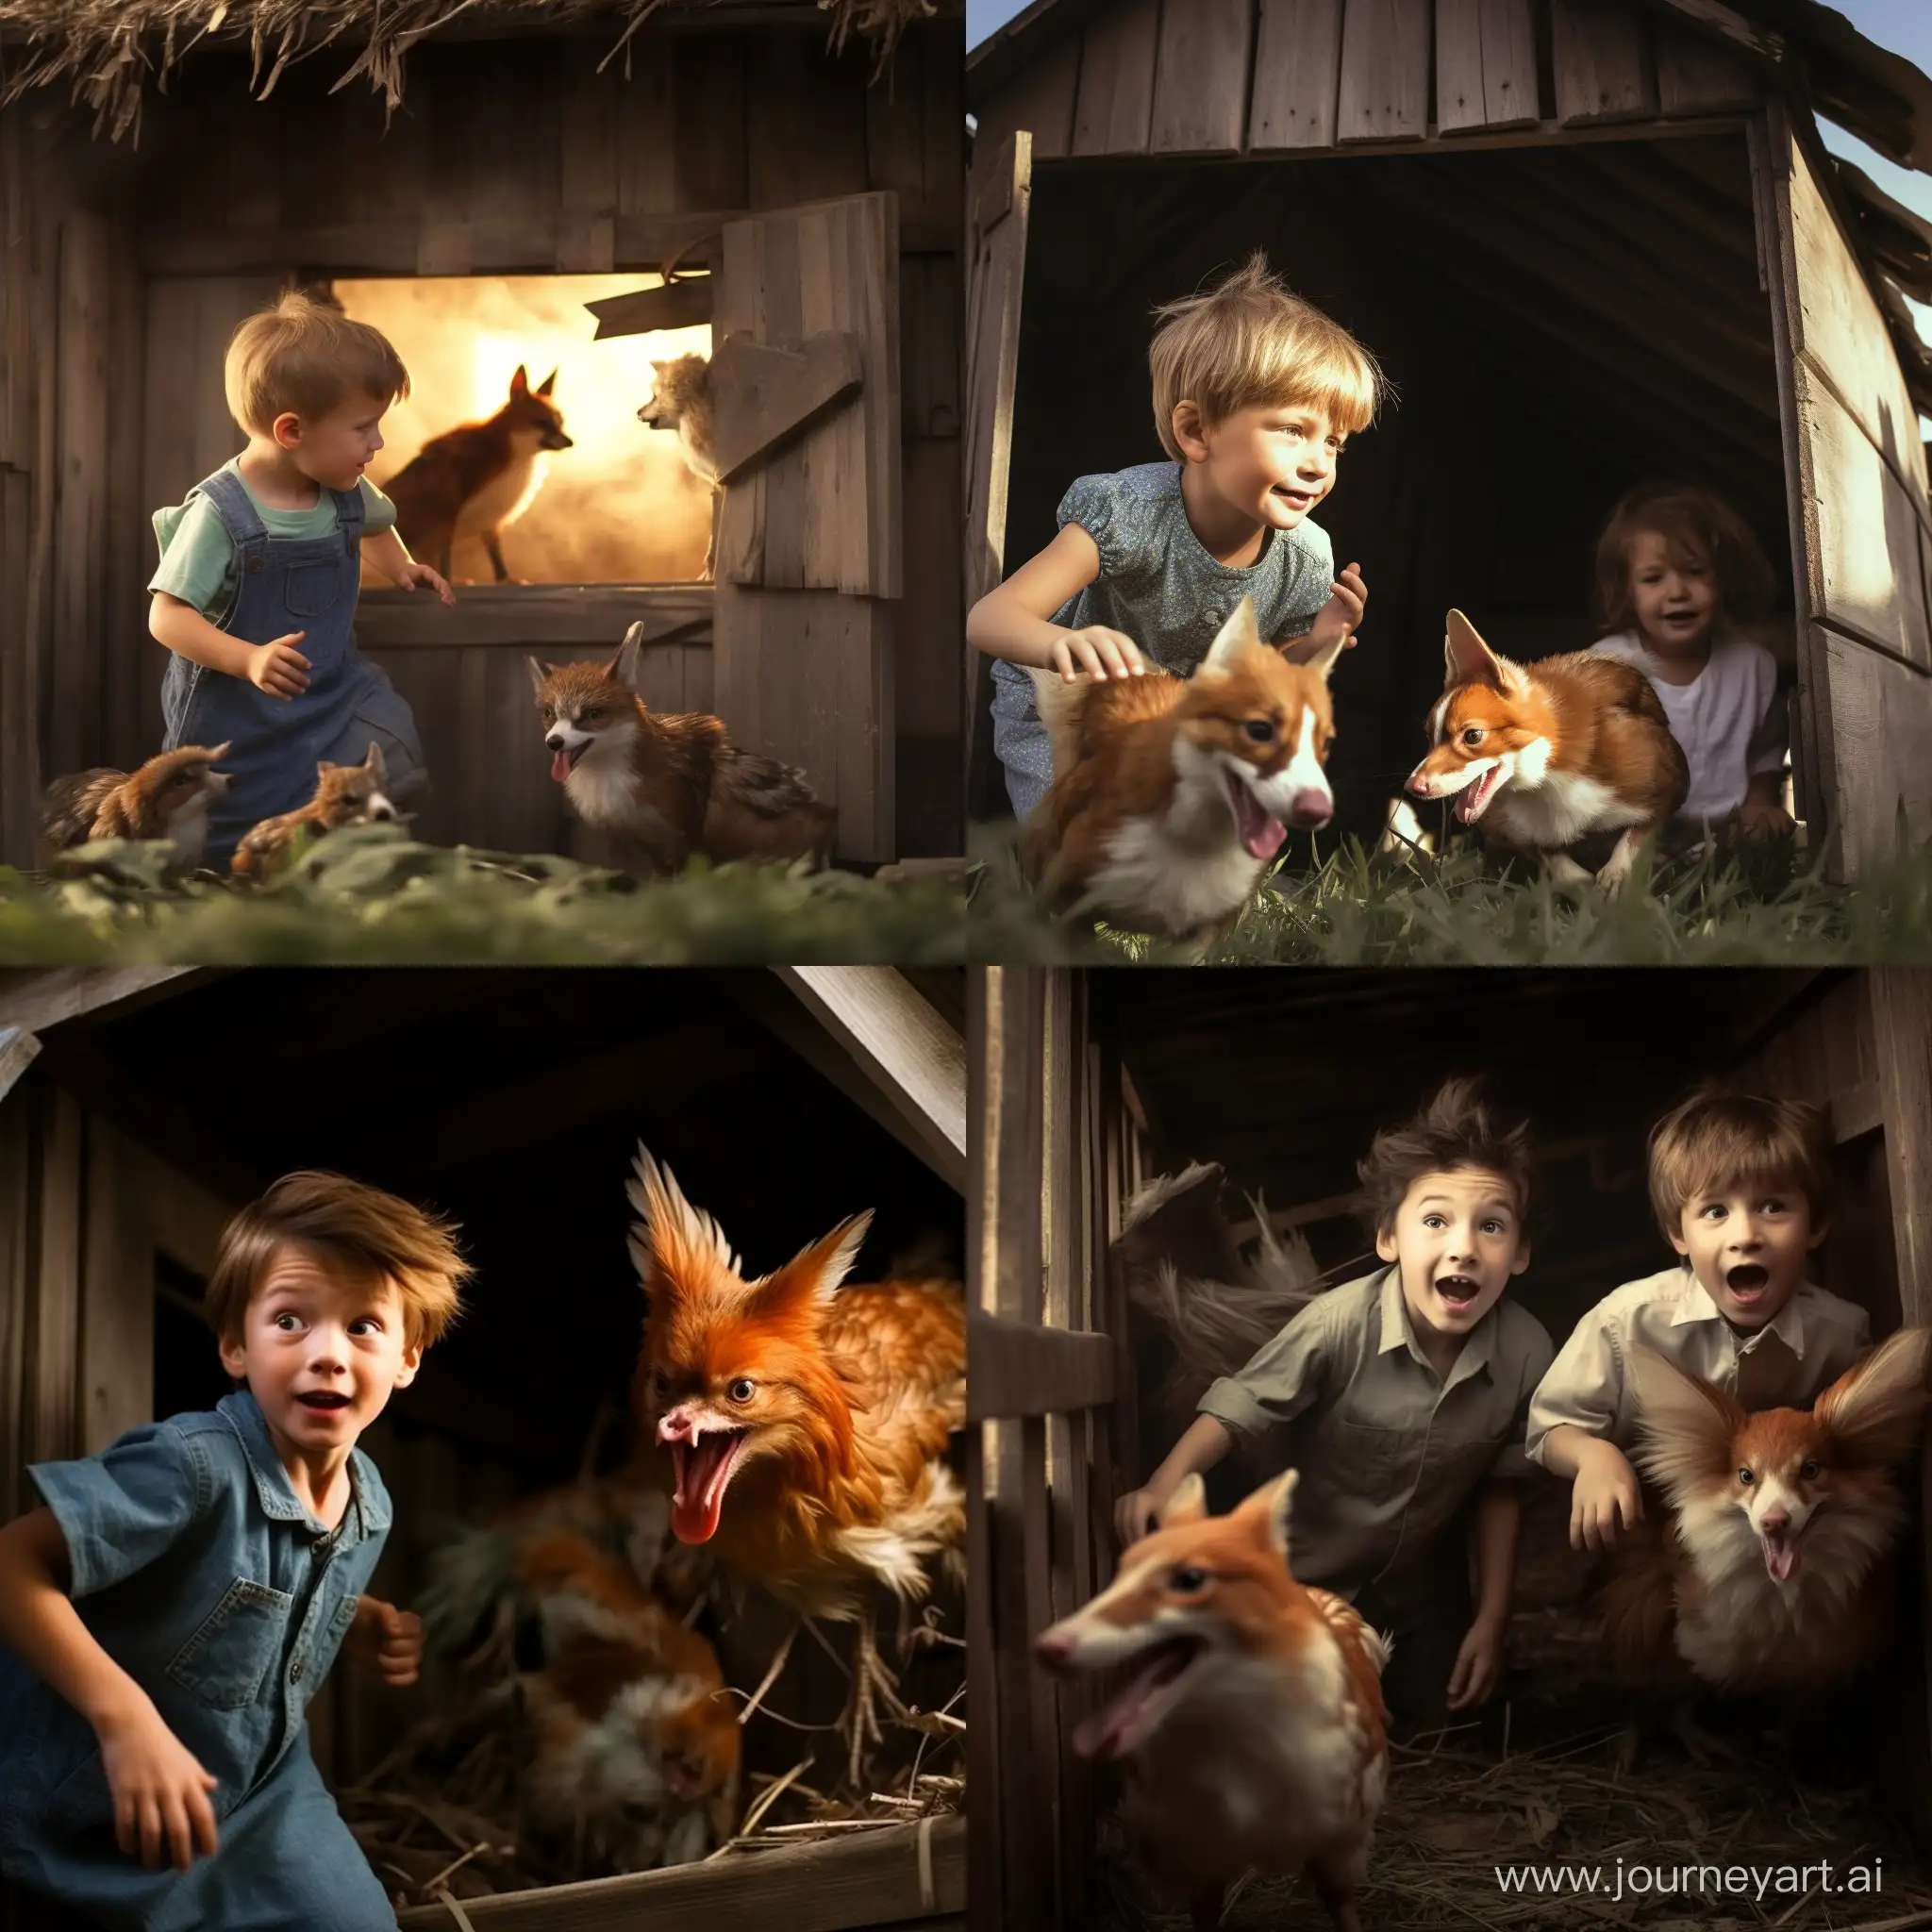 An image of a fox sneaking in the chicken coop, the chickens are panicking and run away, two boys are trying the fox doing that, photo